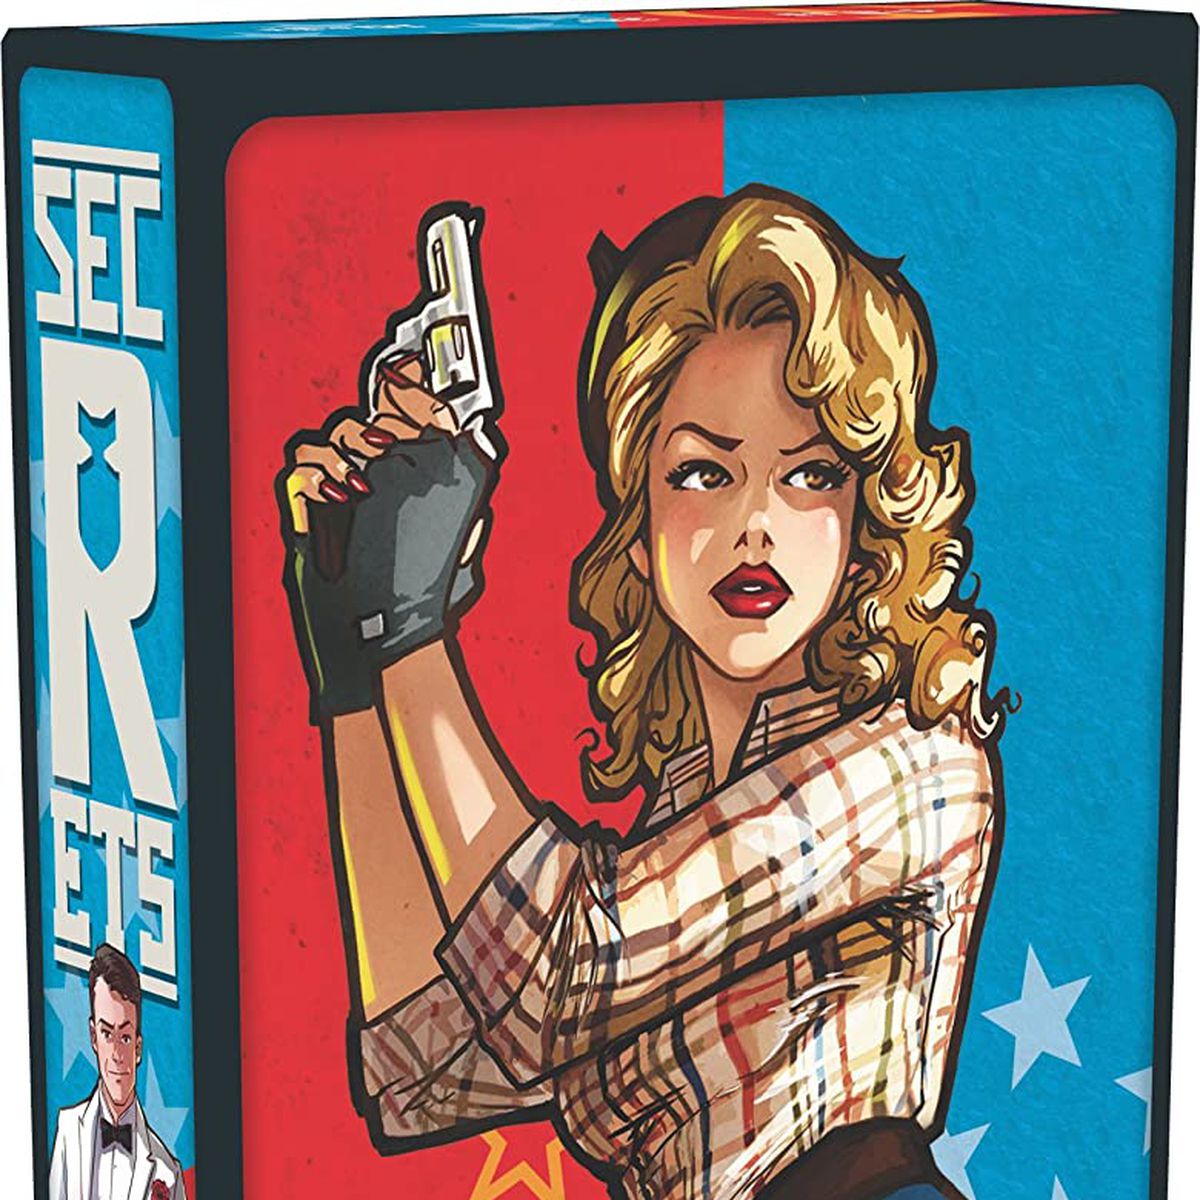 The Secrets box art shows a woman holding a gun next to the Russian hammer and sickle.